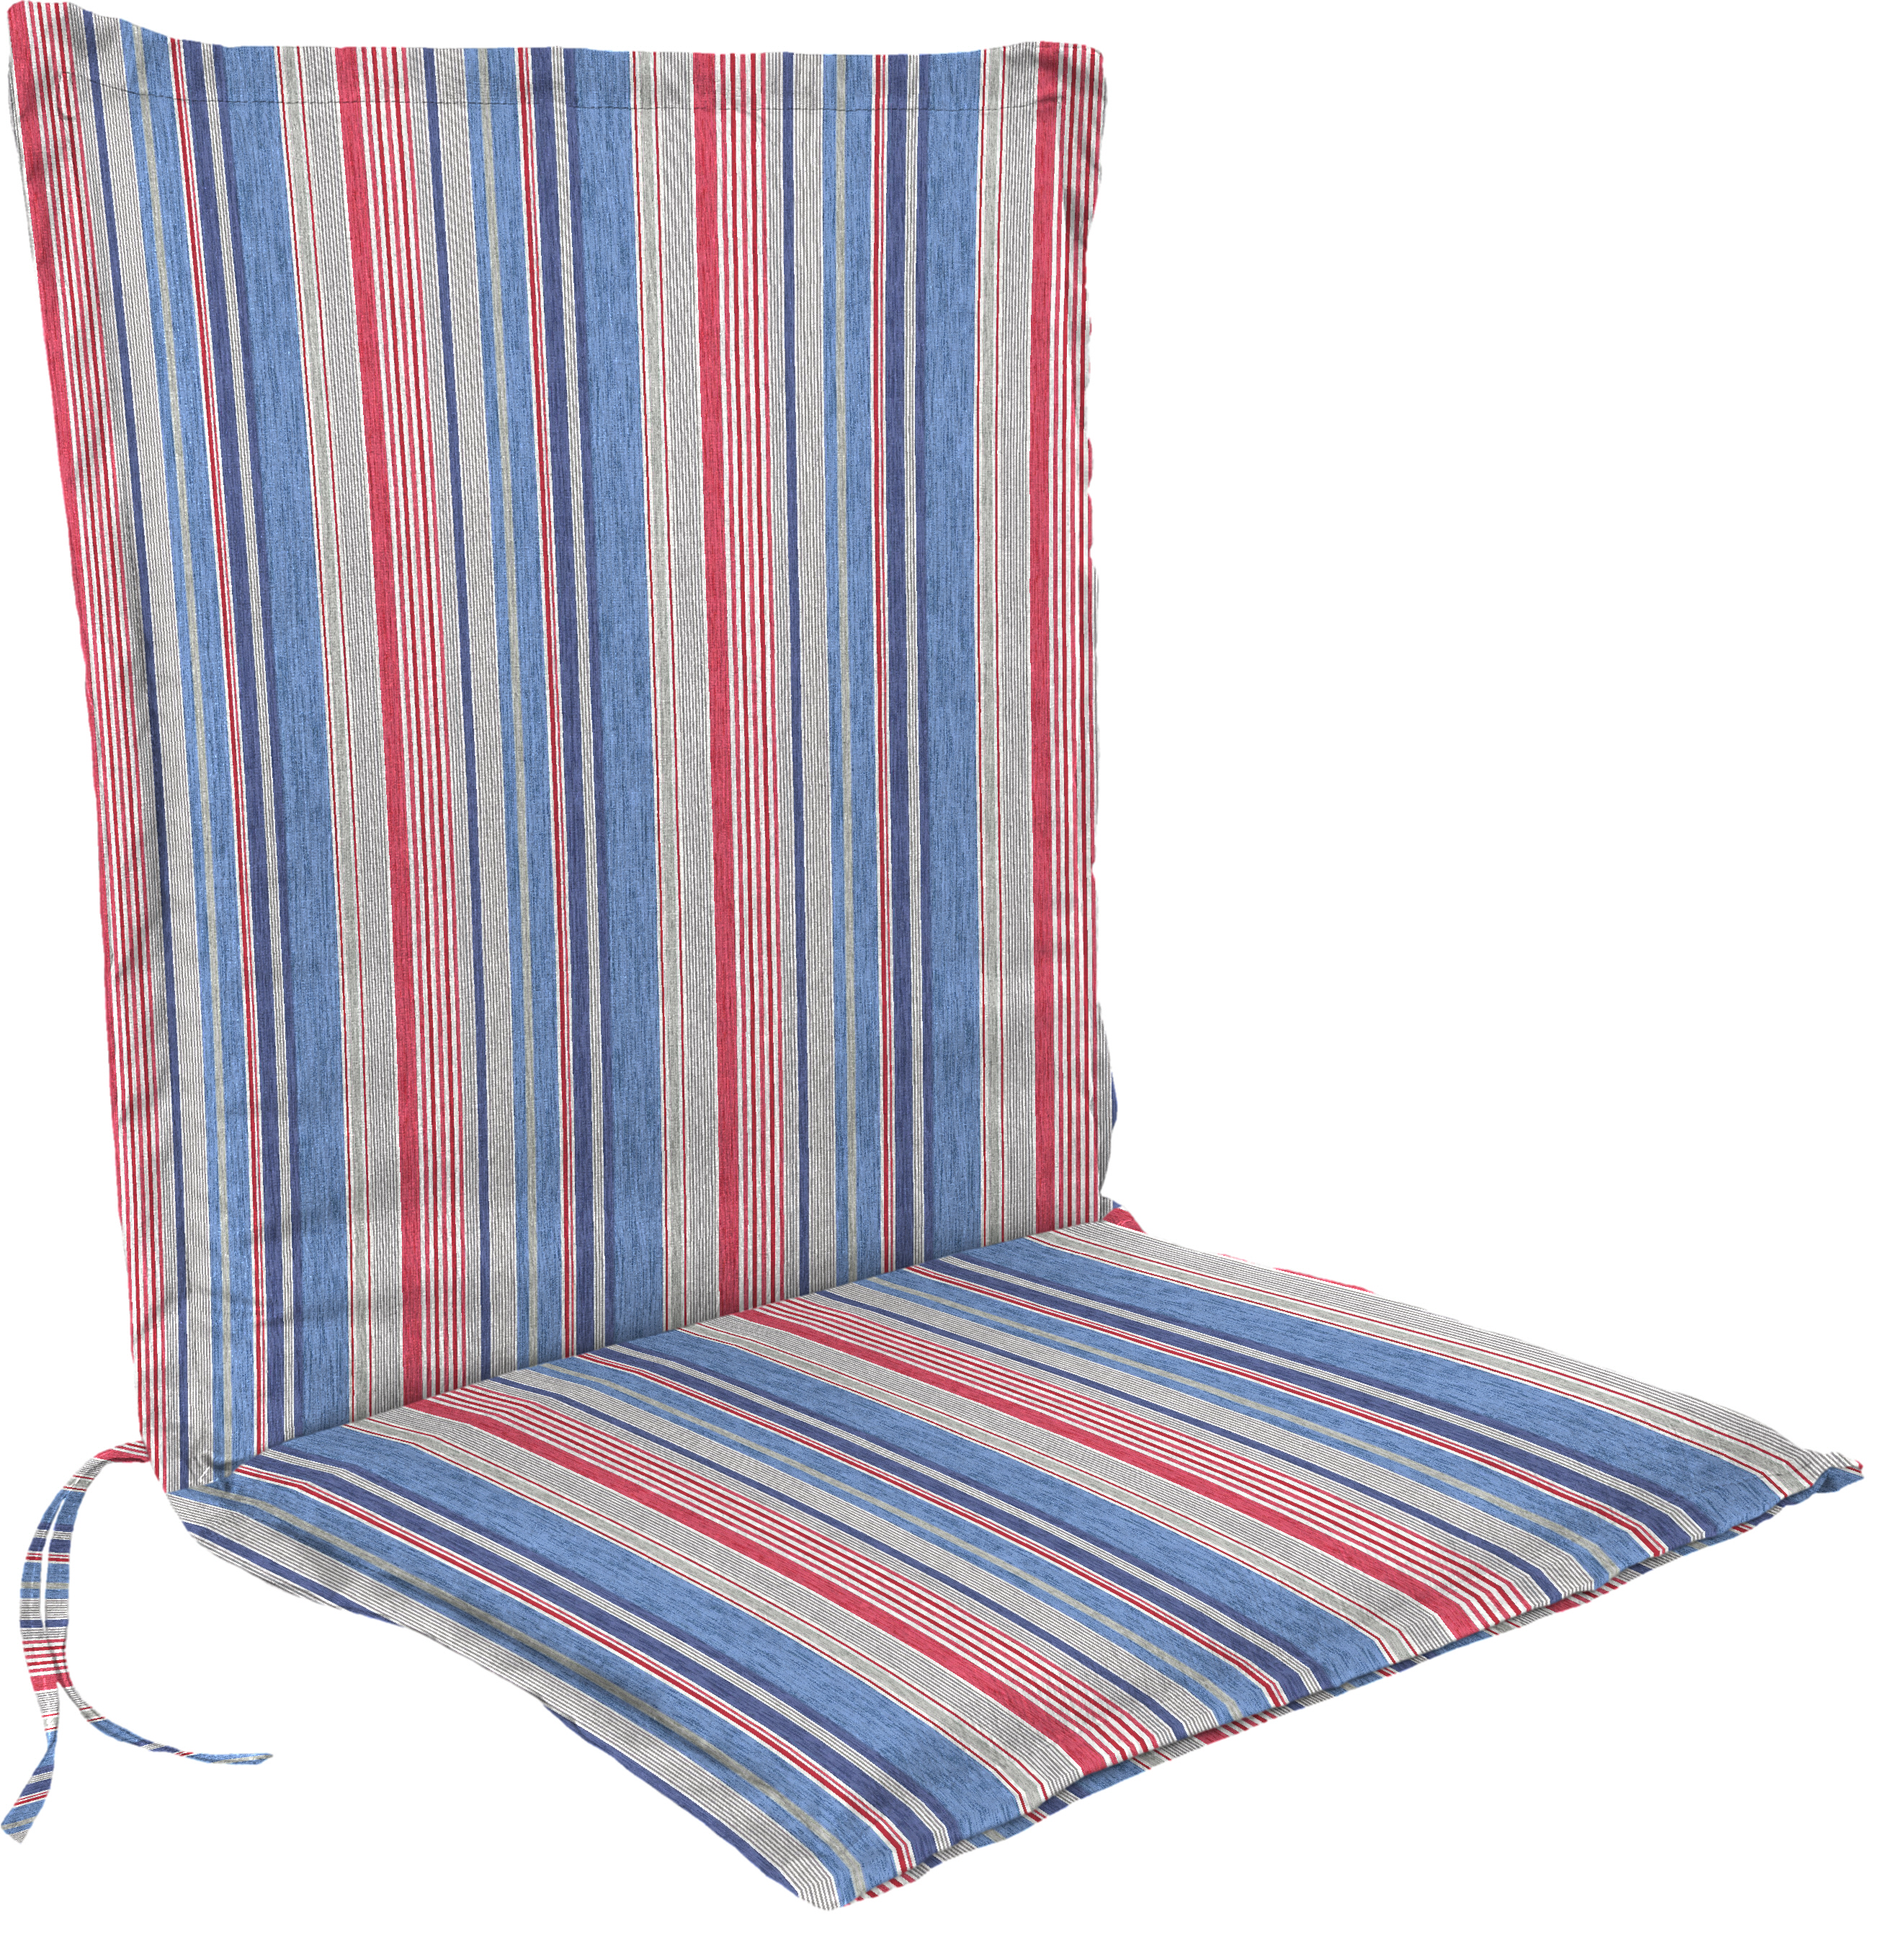 Flange Patio Chair Cushion in The Right Stripe Blue Marine